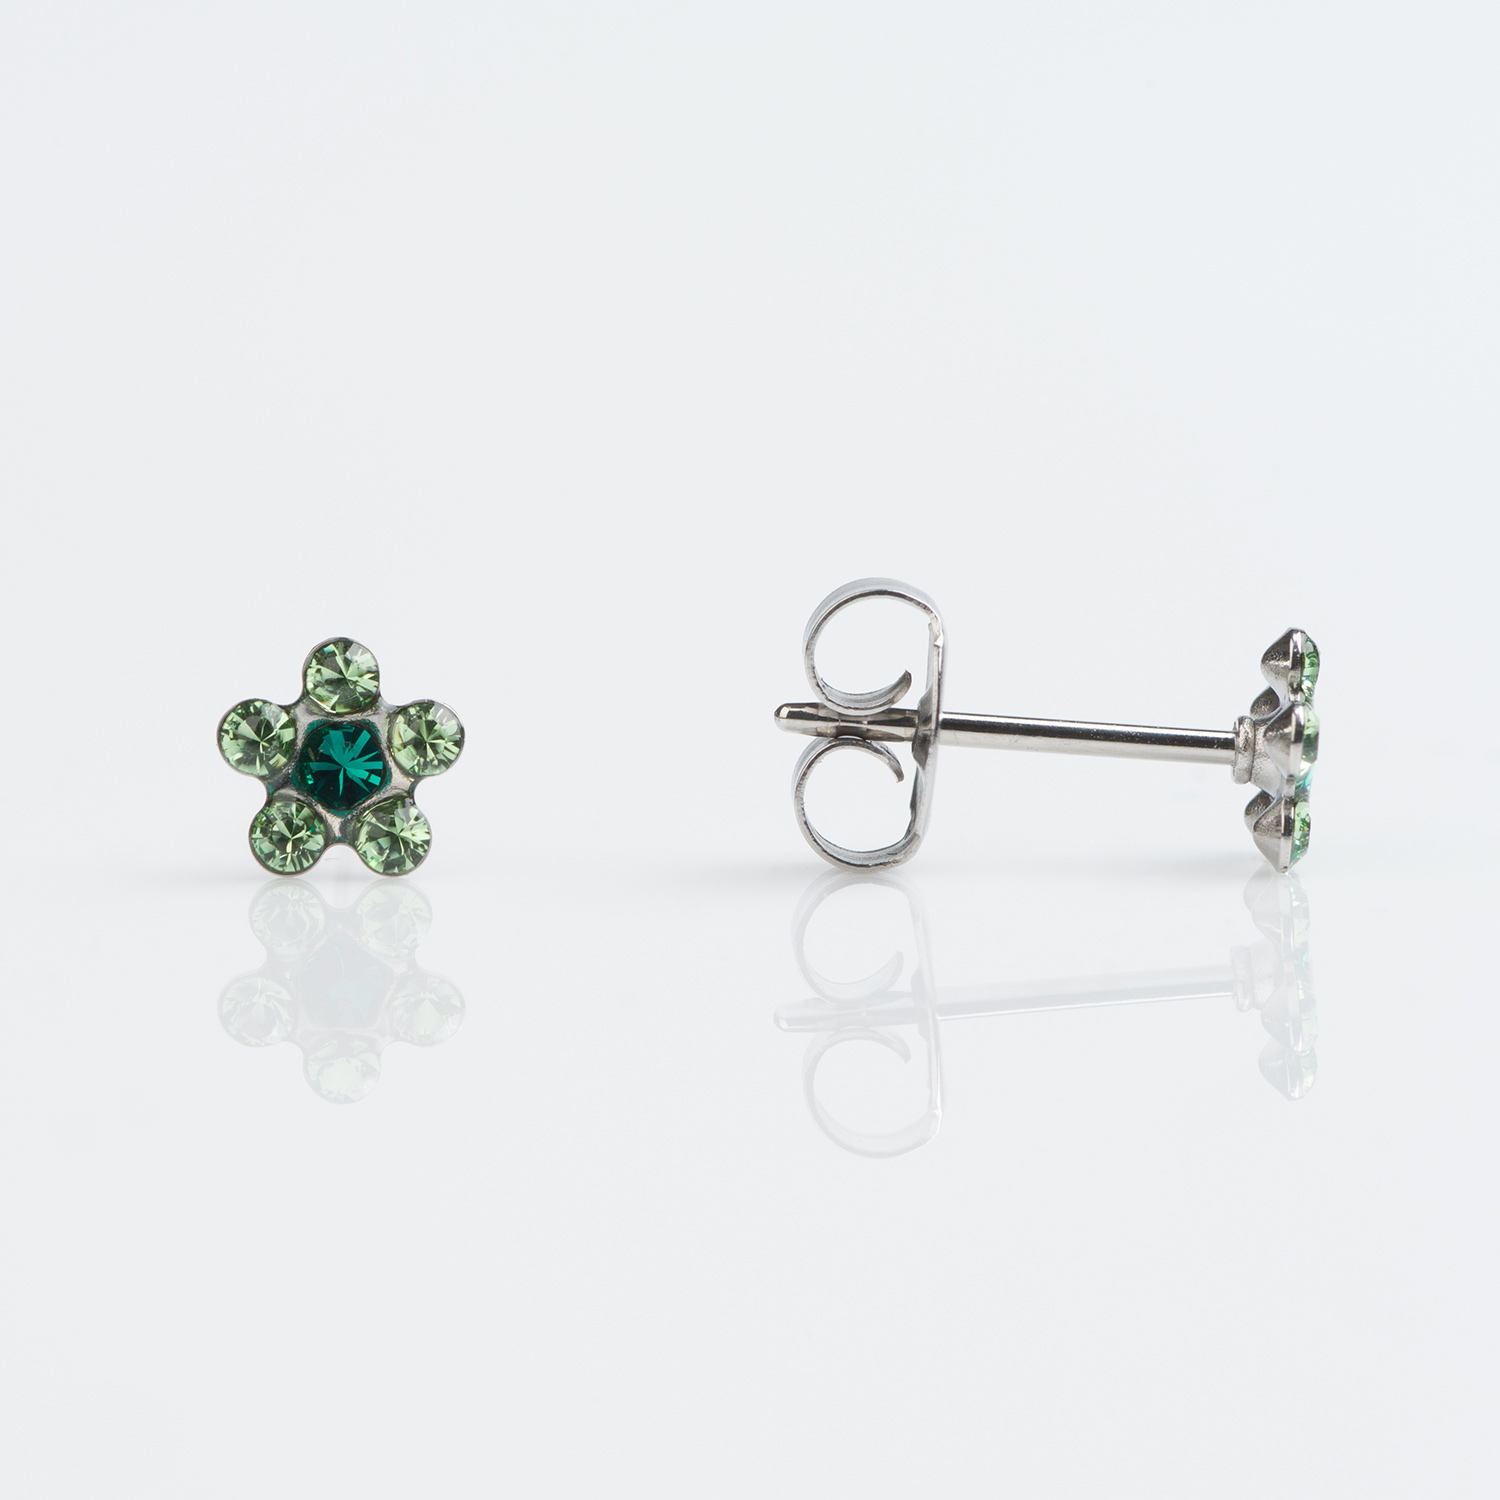 TT-6085W – Studex Tiny Tips Stainless 5mm Daisy August Peridot May Emerald Stud Earring